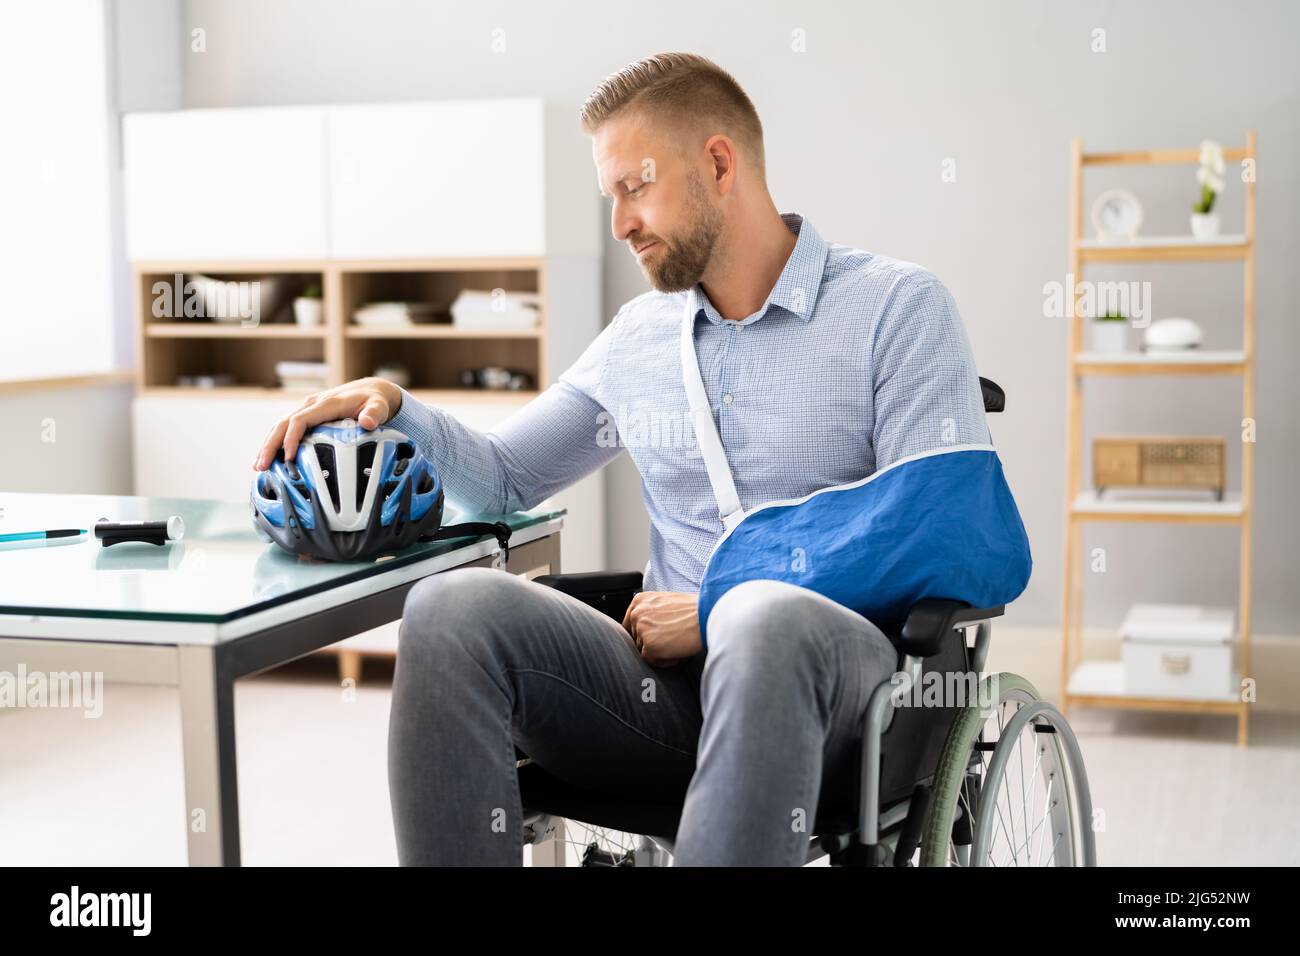 Motorcycle Accident Injury. Man With Arm Fracture. Hand Recovery Stock Photo